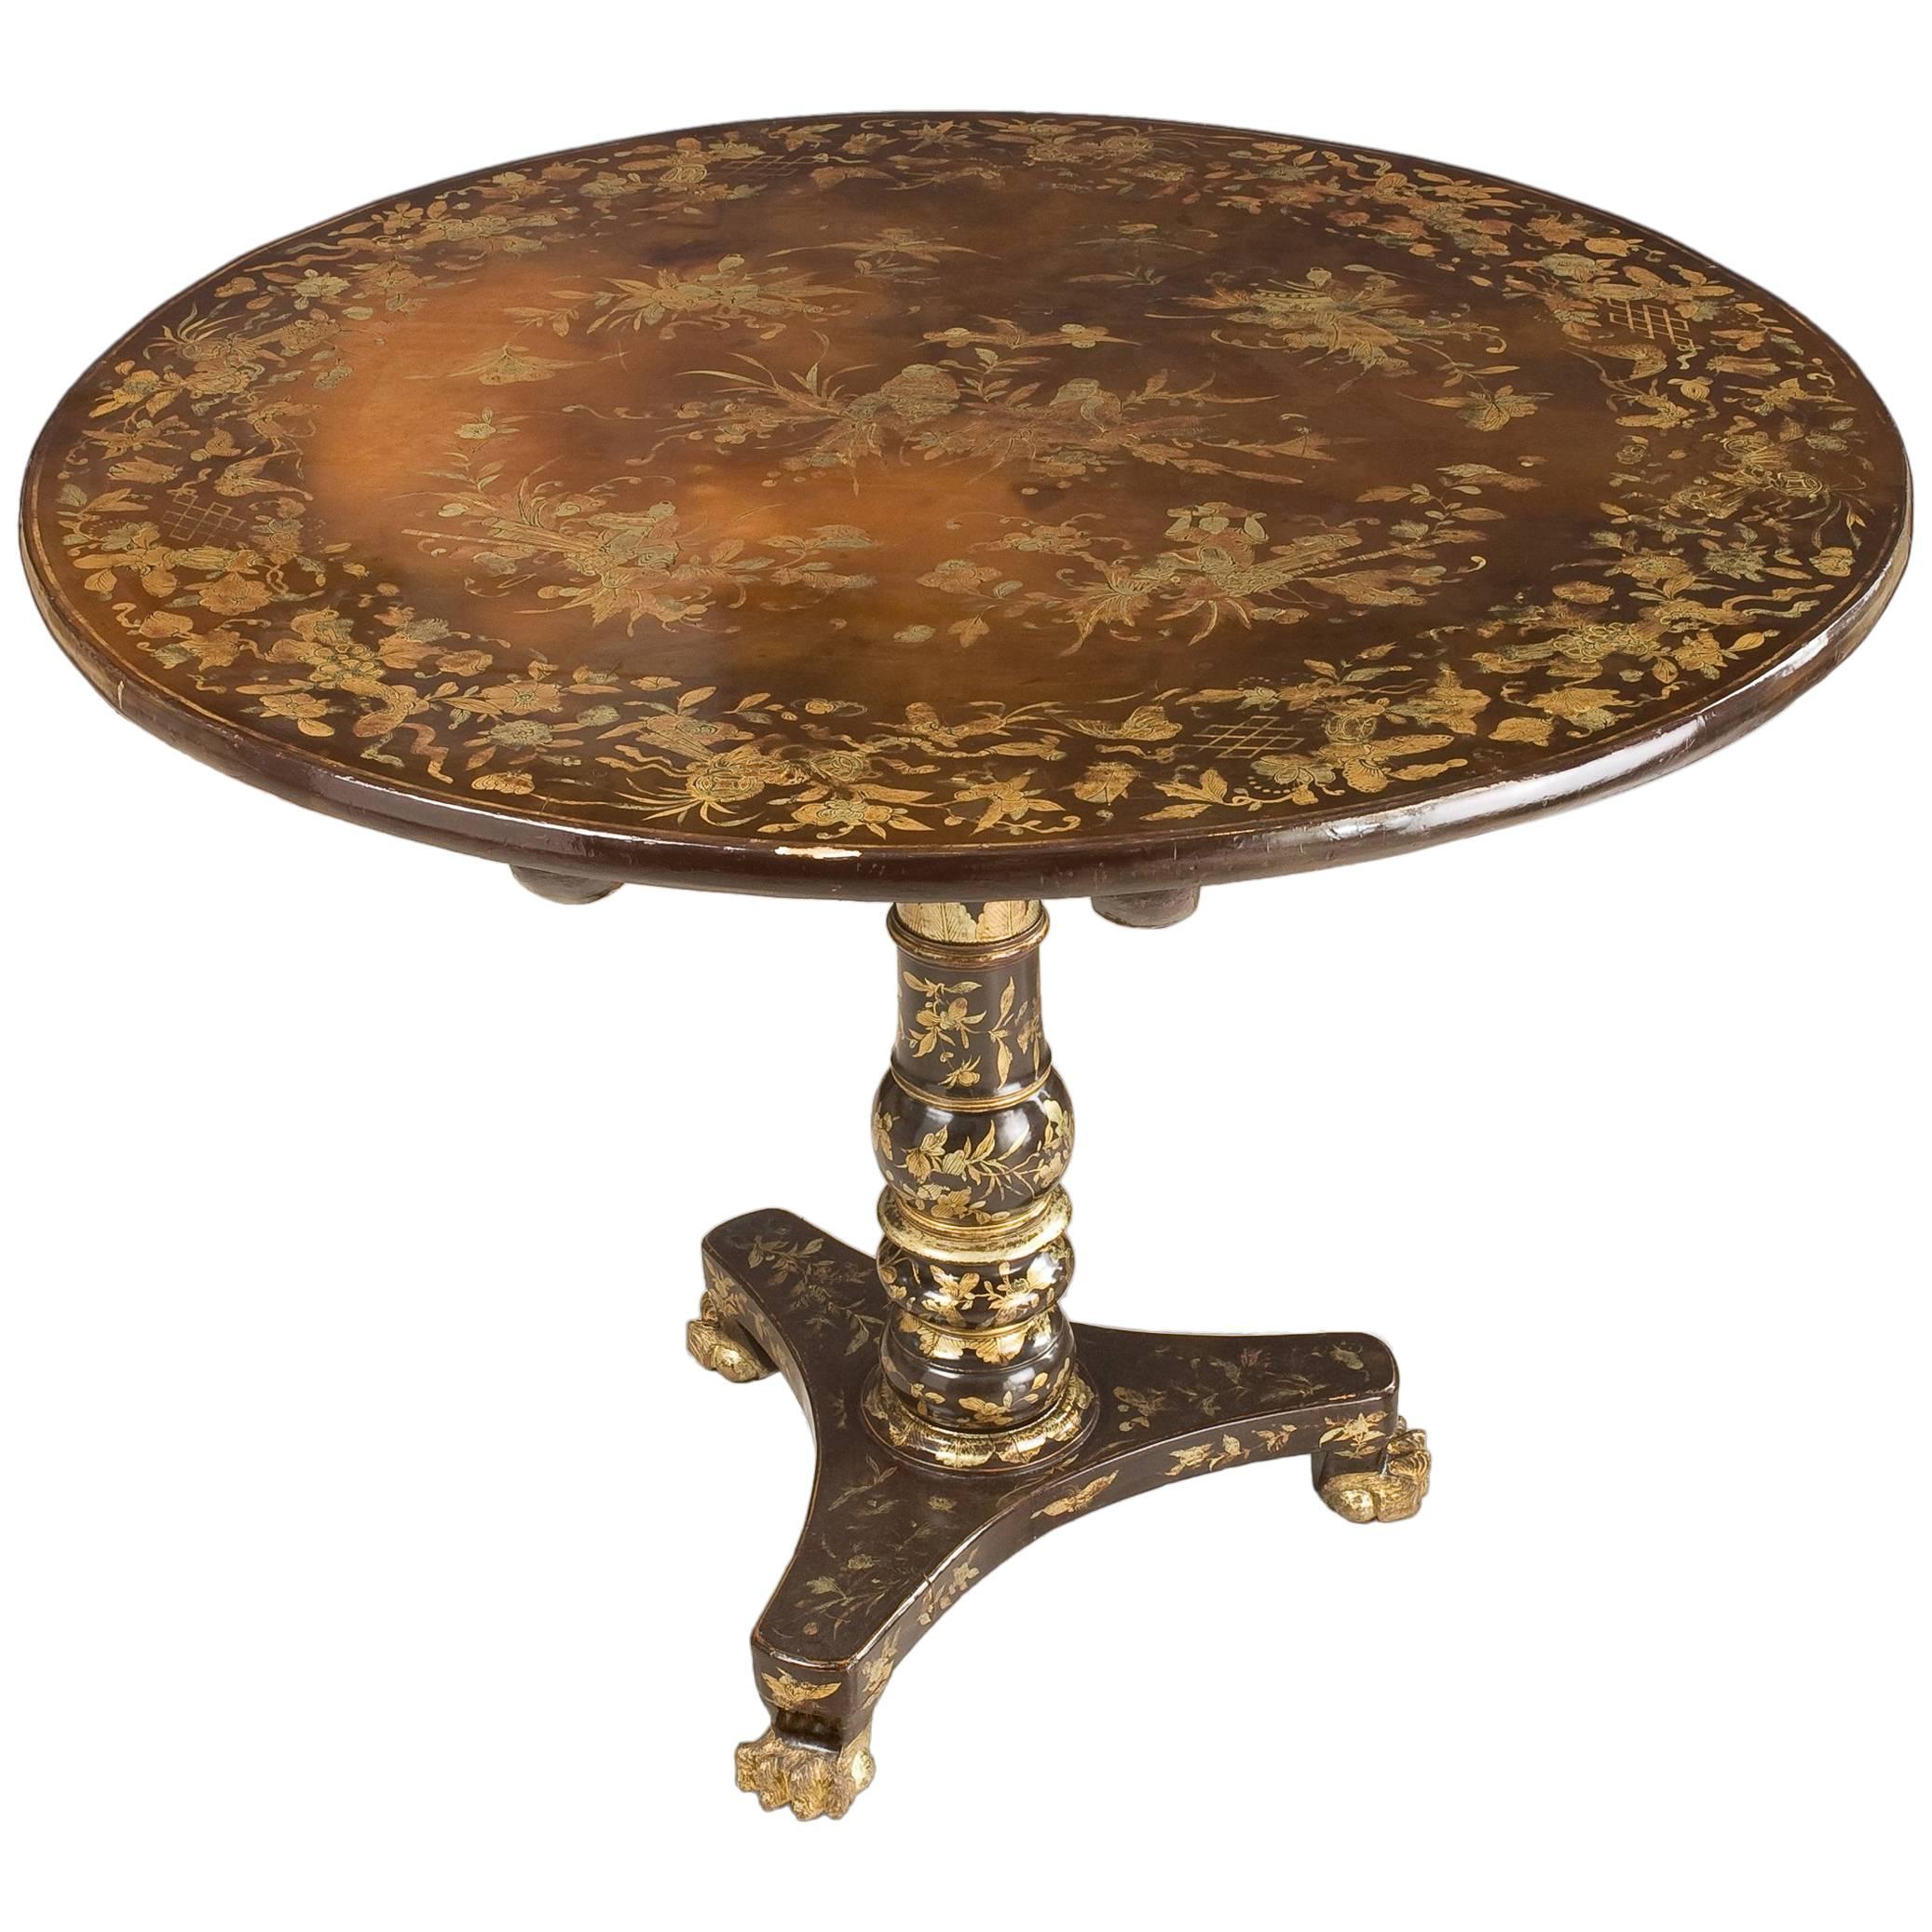 Lacquered Colonial Pedestal Table, First Quarter of the 19th Century